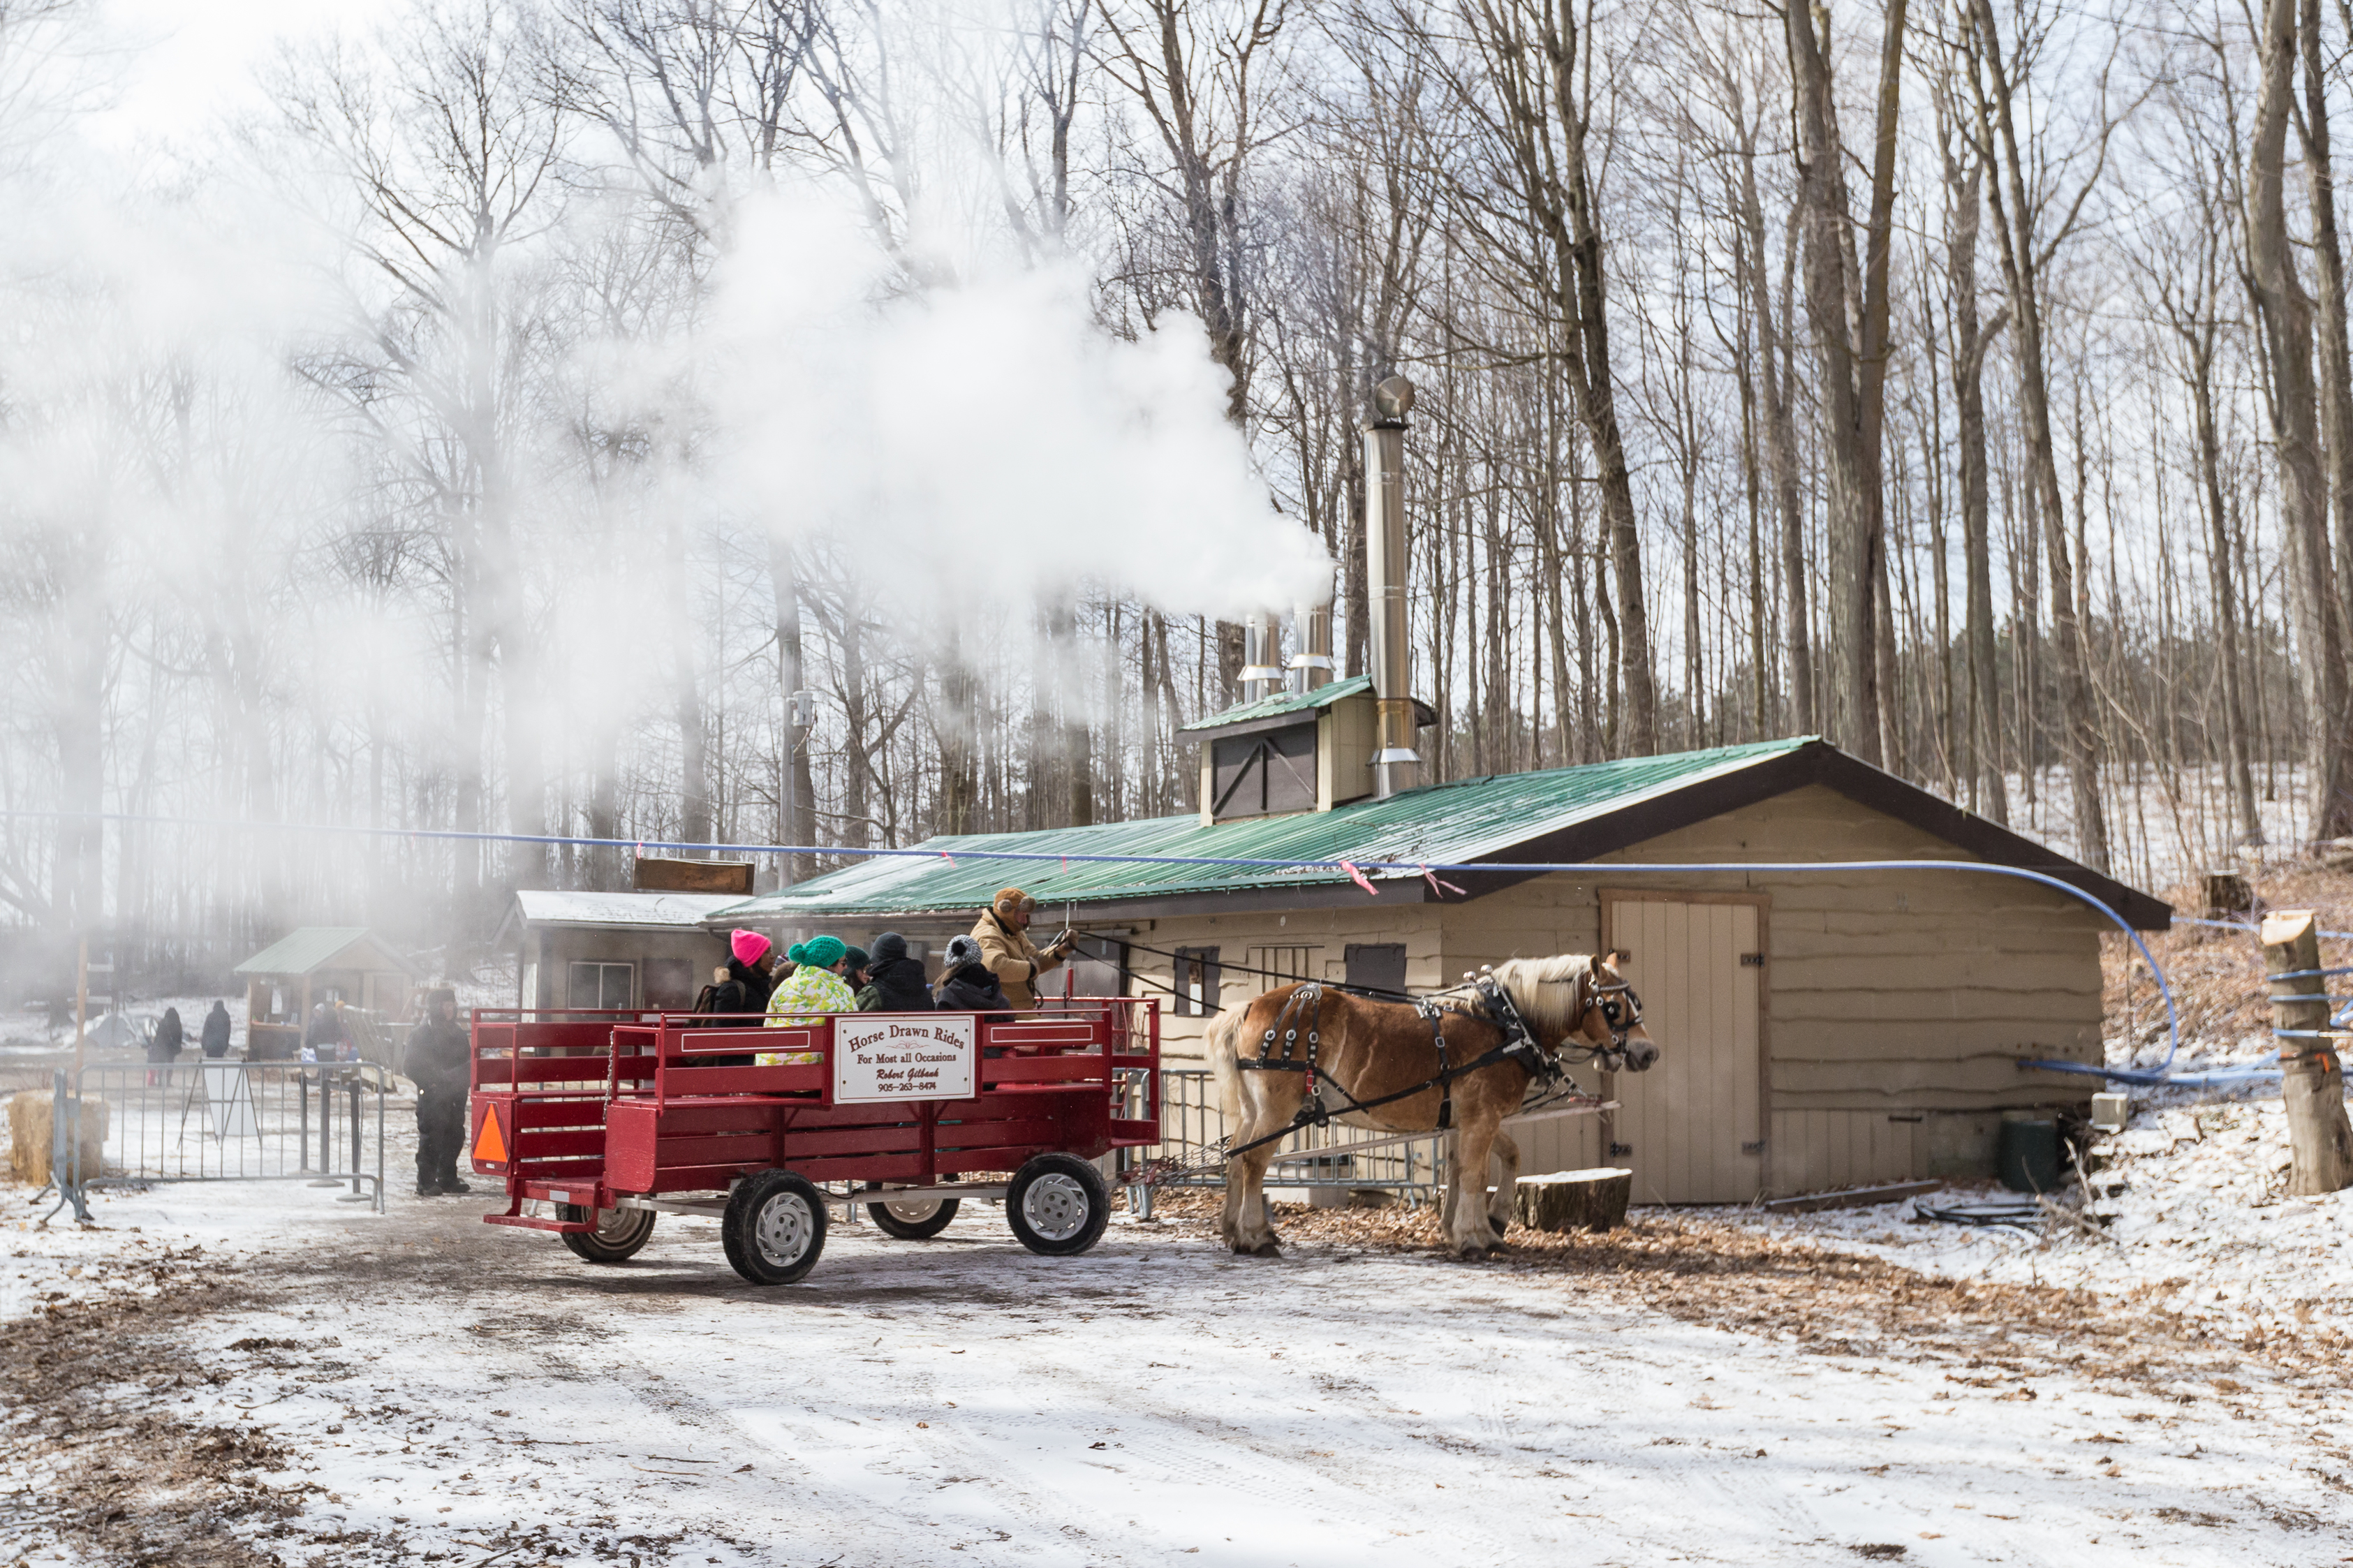 Horse and wagon outside the sugar shack at the Purple Woods Maple Syrup Festival in Oshawa